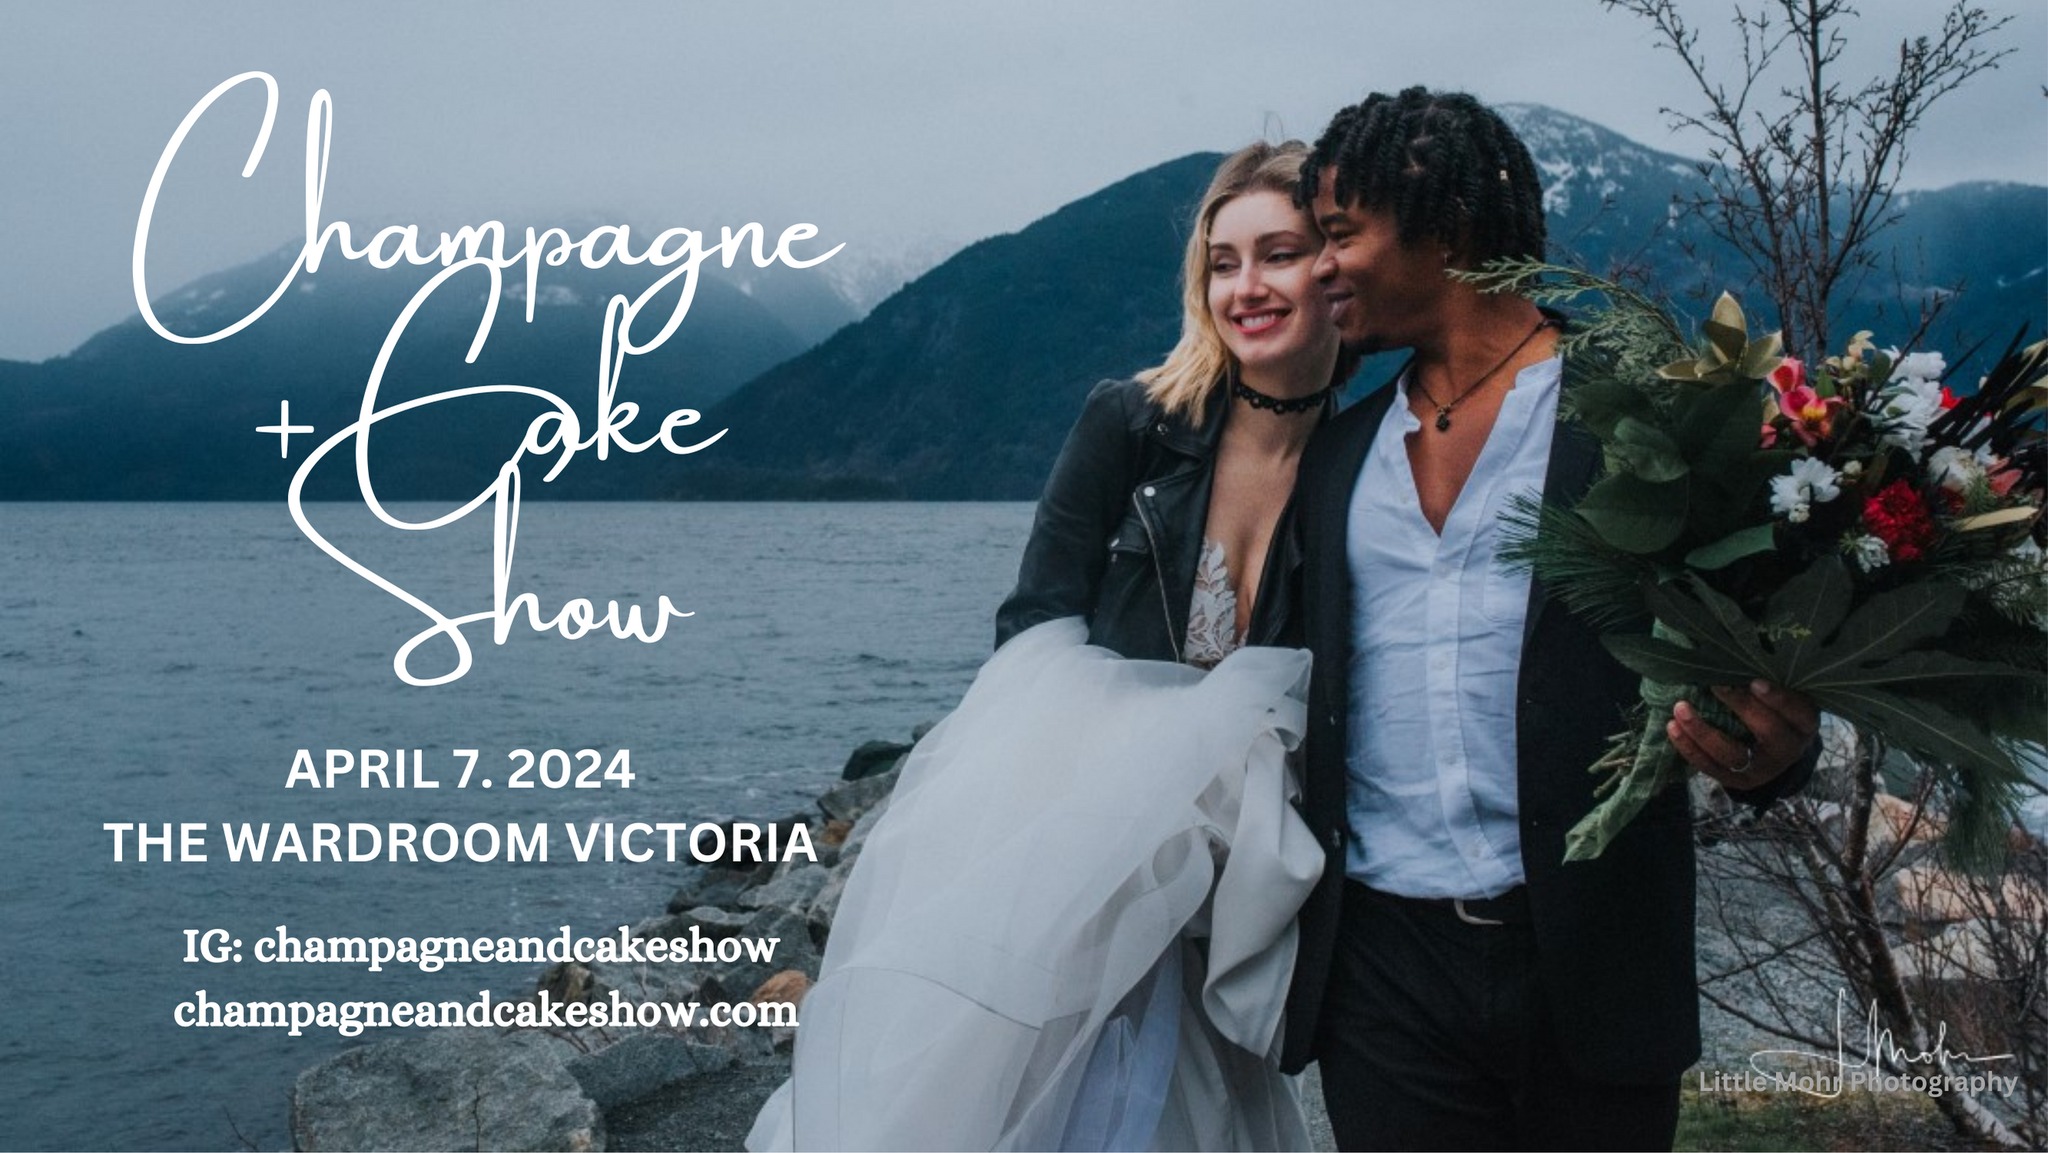 Champagne and Cake Show April 7 2024